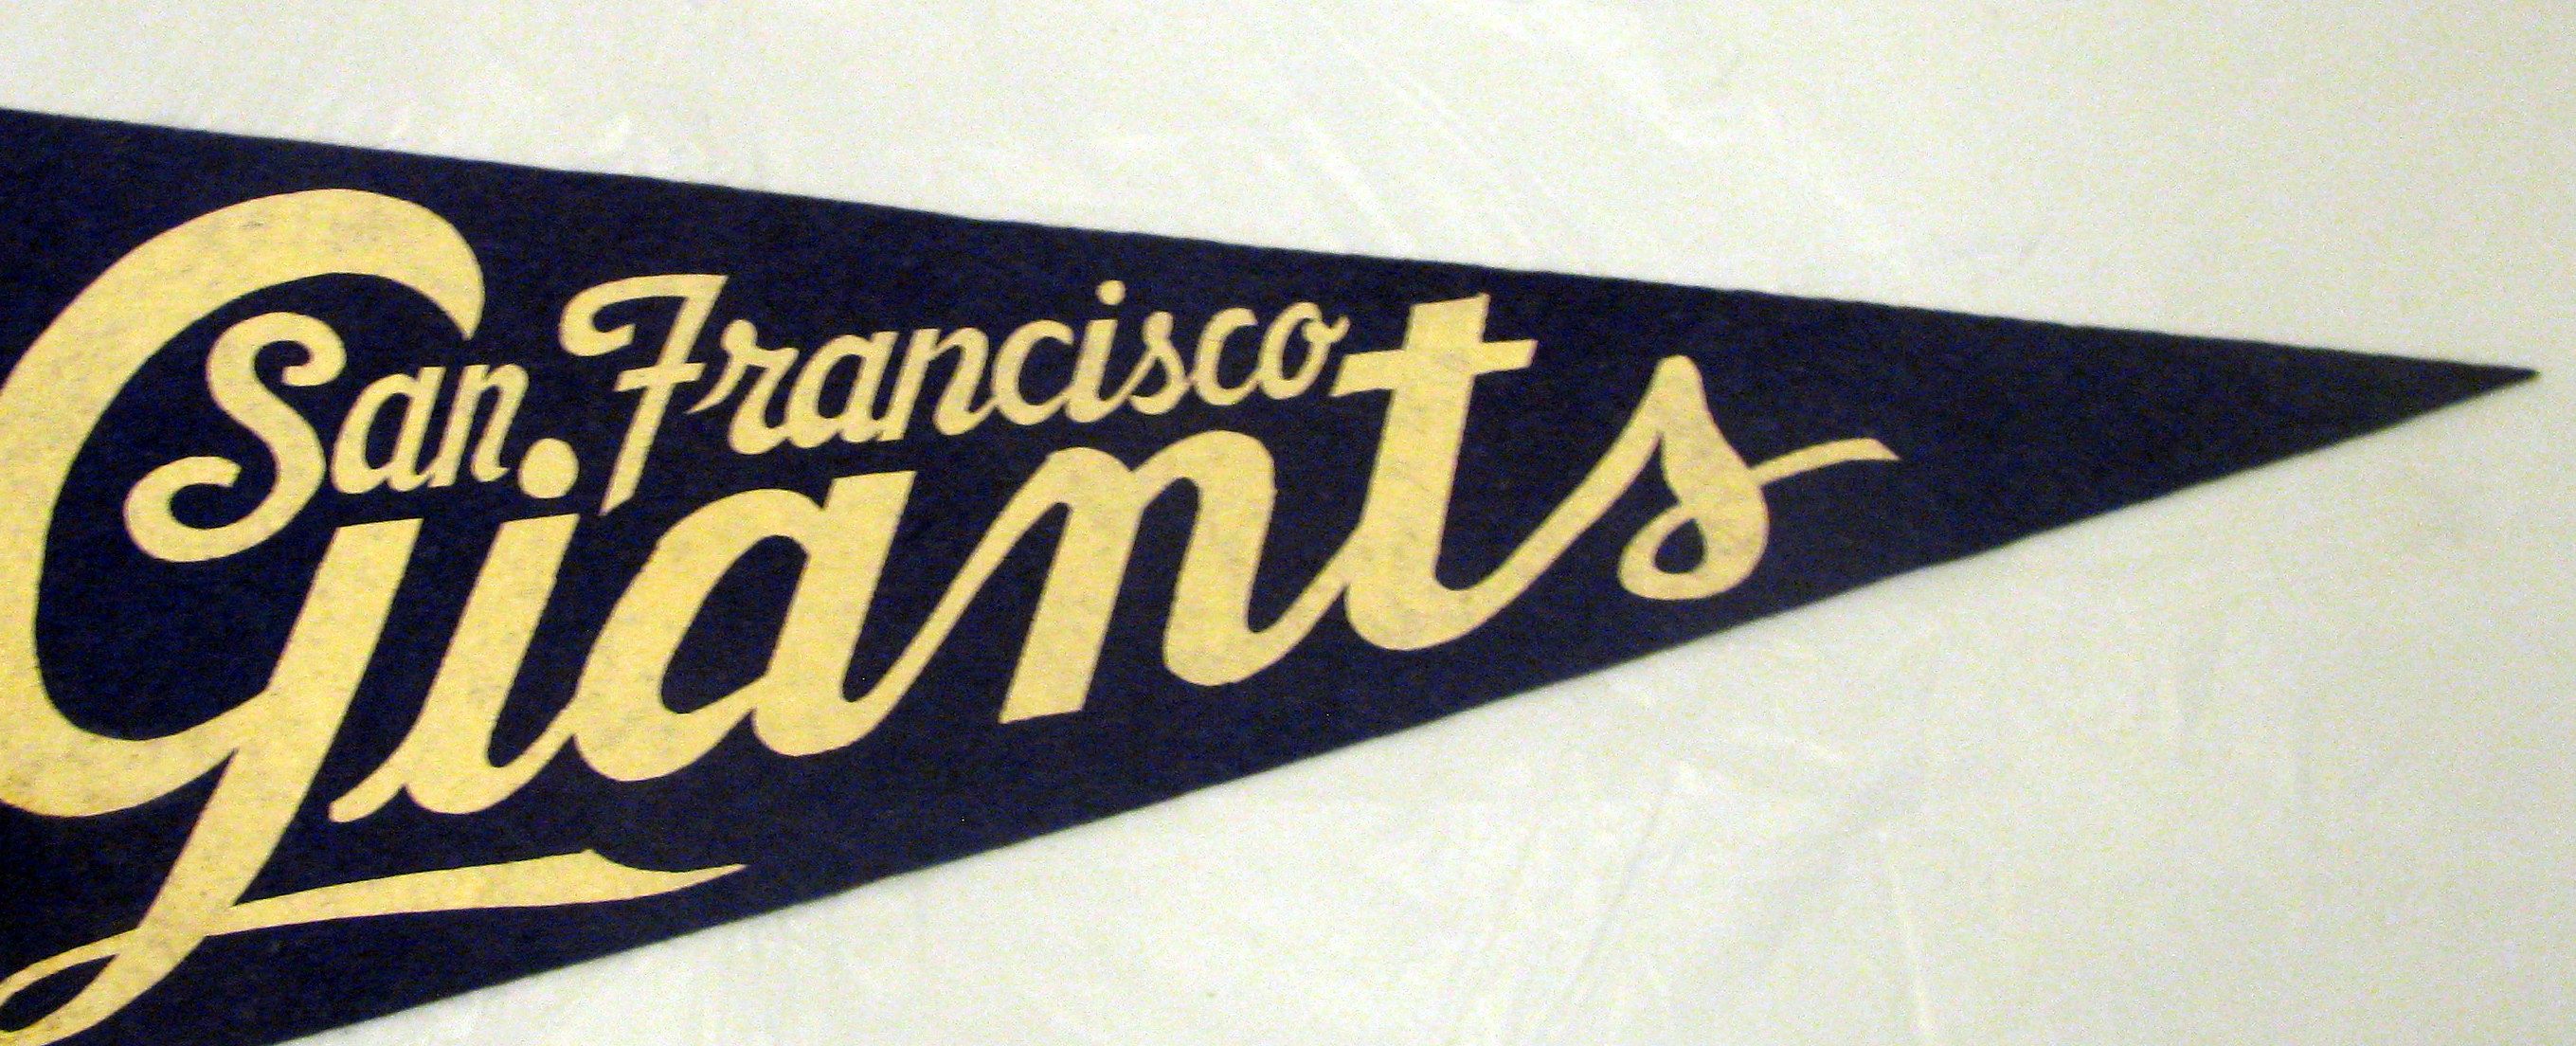 Lot Detail - 1958 SAN FRANCISCO GIANTS PENNANT - 1st YEAR IN S.F.